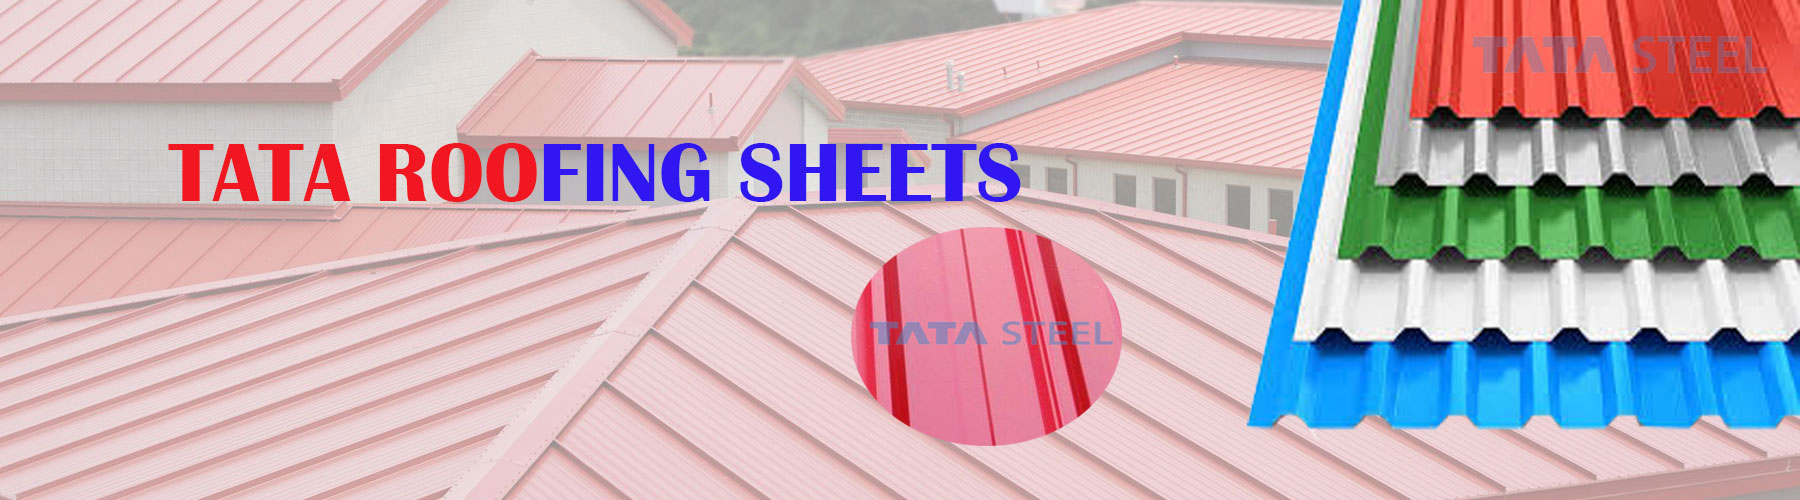 TATA Roofing Sheet Dealers